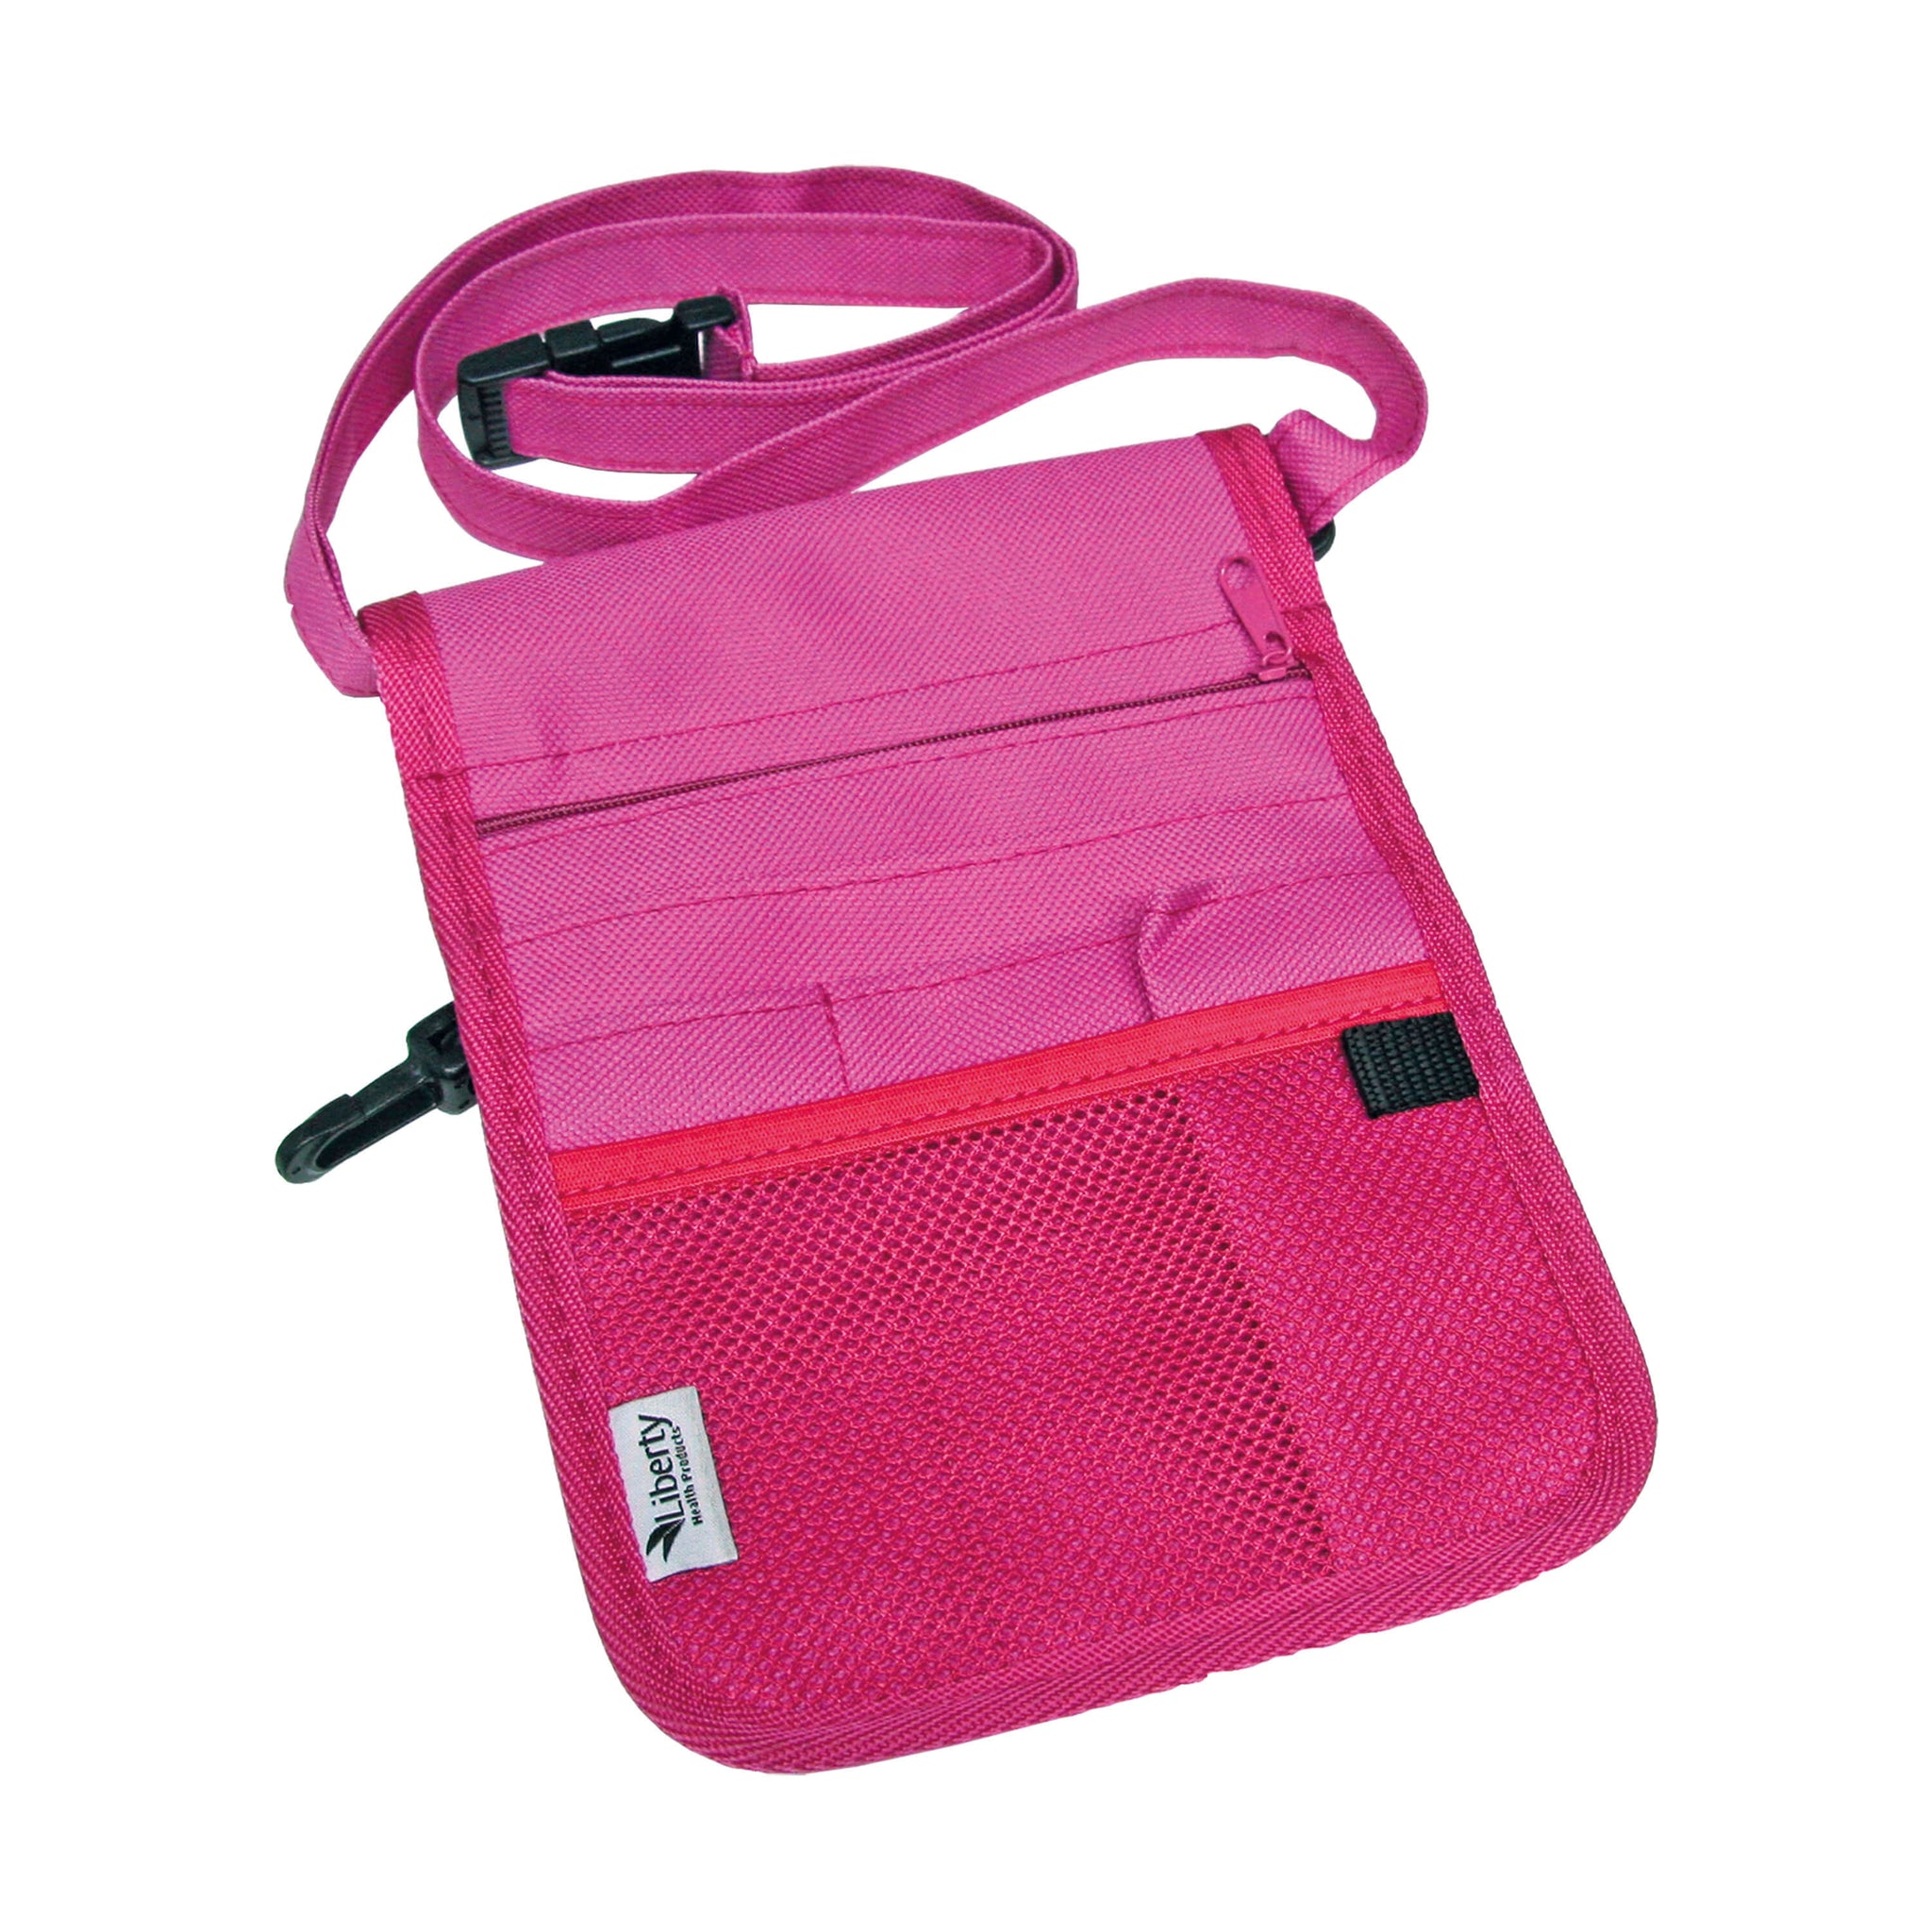 Nurse's Pouch- With Strap, Pink, 16 X 20 cm